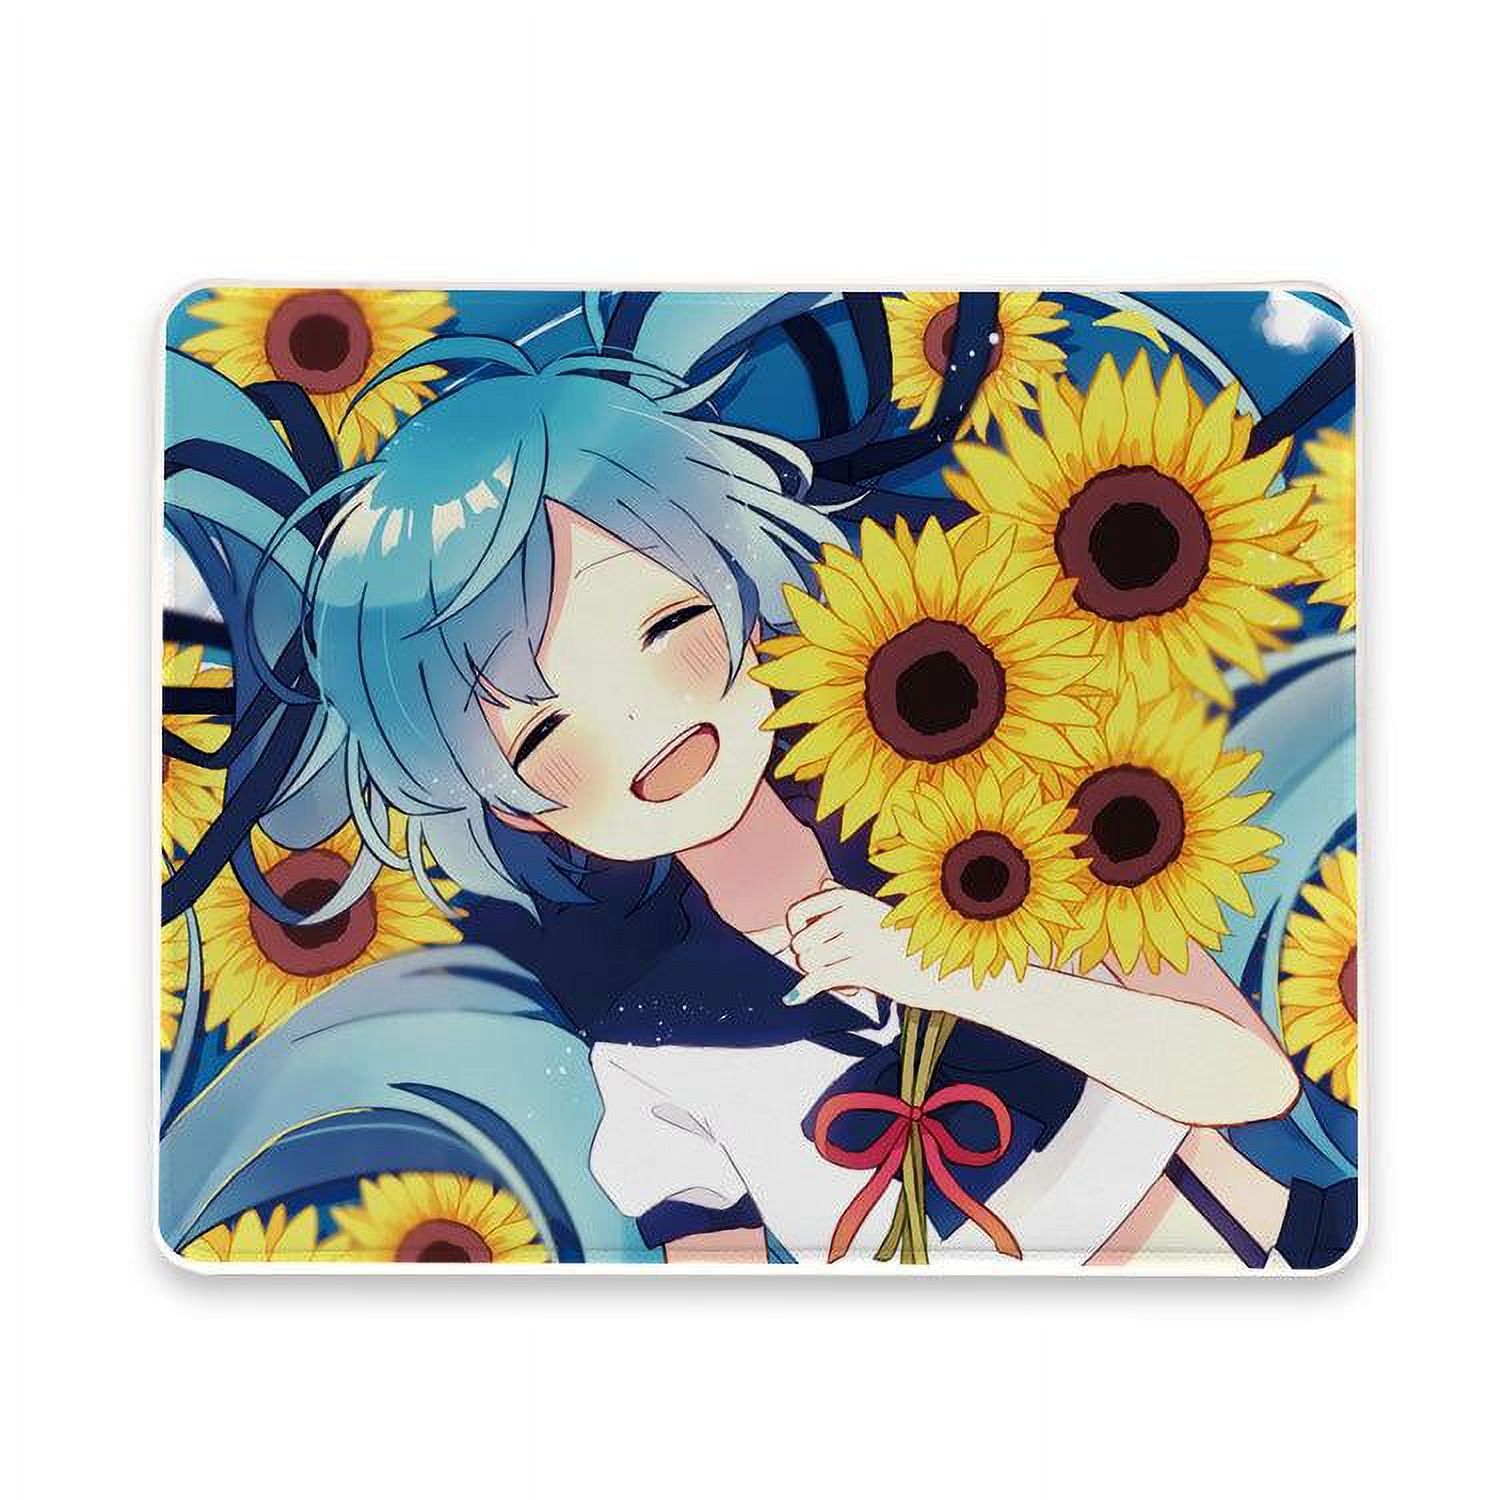 Non-Slip Mouse Pad for Home, Office, and Gaming Desk mousepad anti-slip mouse pad mat mice mousepad desktop mouse pad laptop mouse pad gaming mouse pad - image 5 of 7